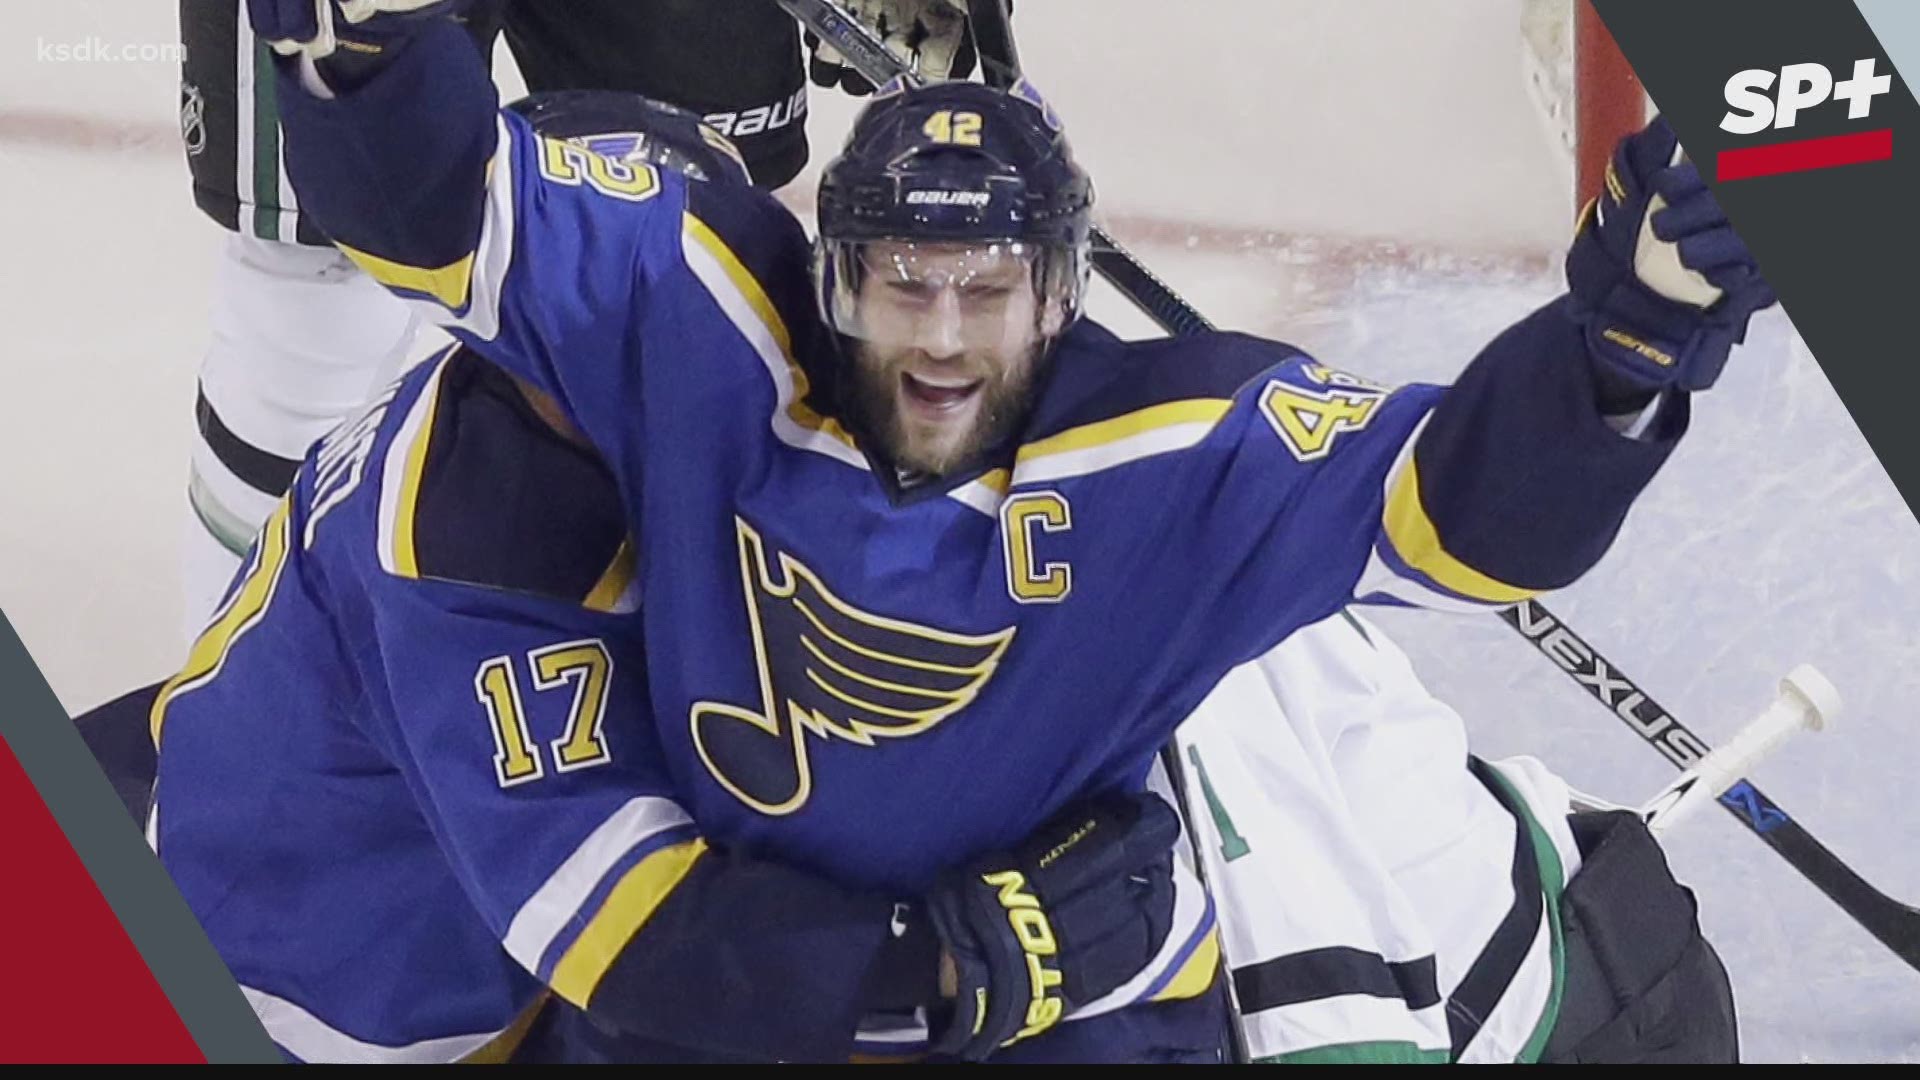 David Backes loves St. Louis. St. Louis loves David Backes. The long-time captain played likely his final game this past week and went one-on-one with Frank Cusumano